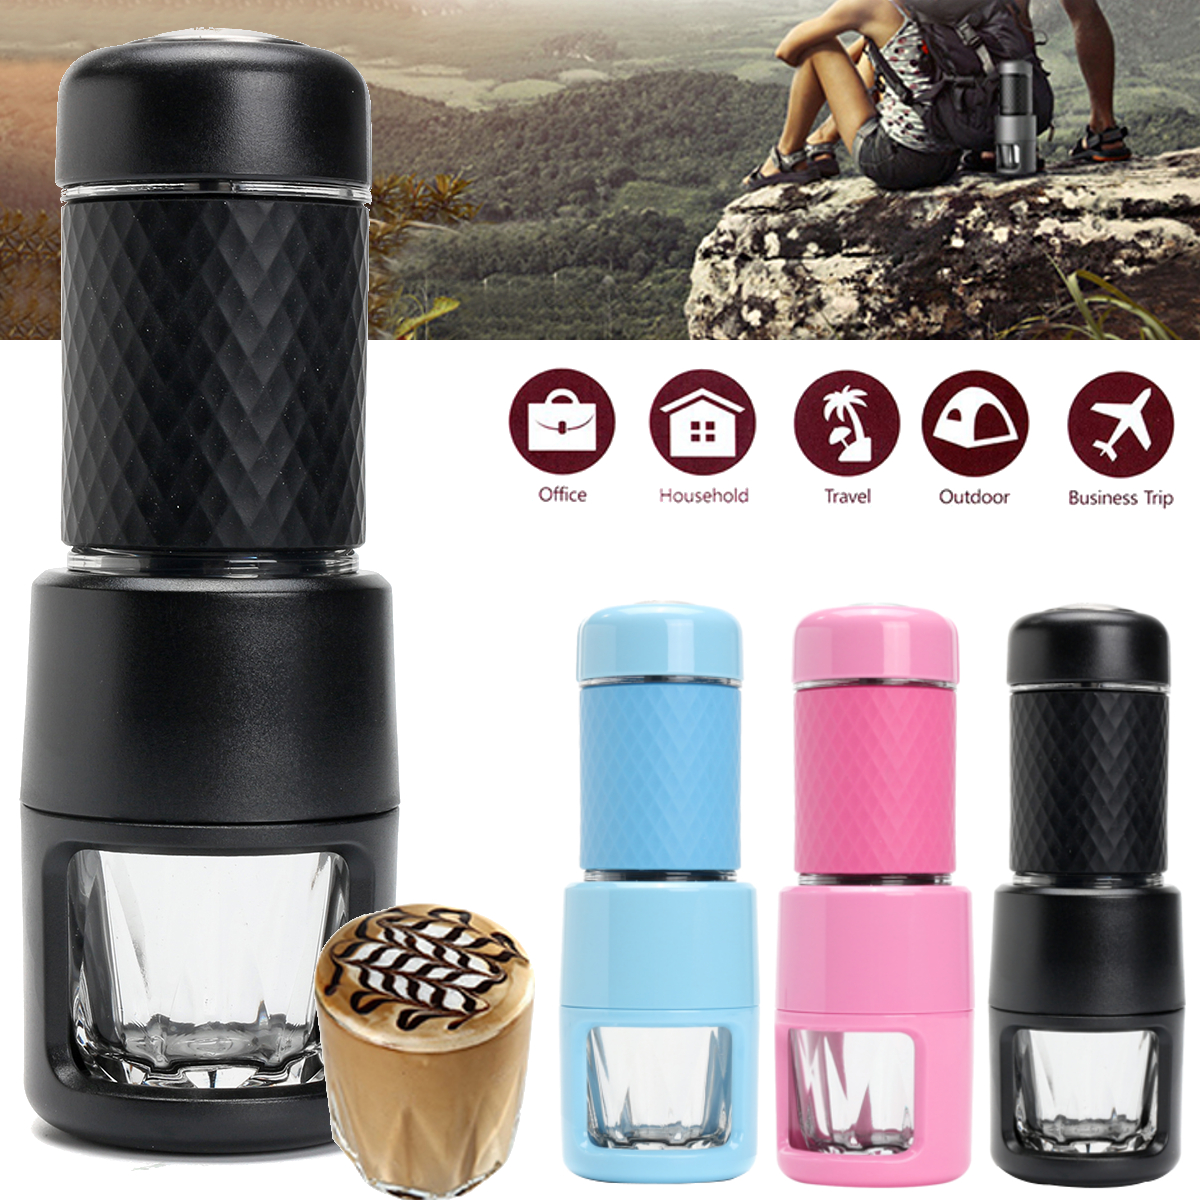 Portable Coffee Maker Travel Handheld Mini Manual Espresso Machine For Outdoor Camping Home Use 5